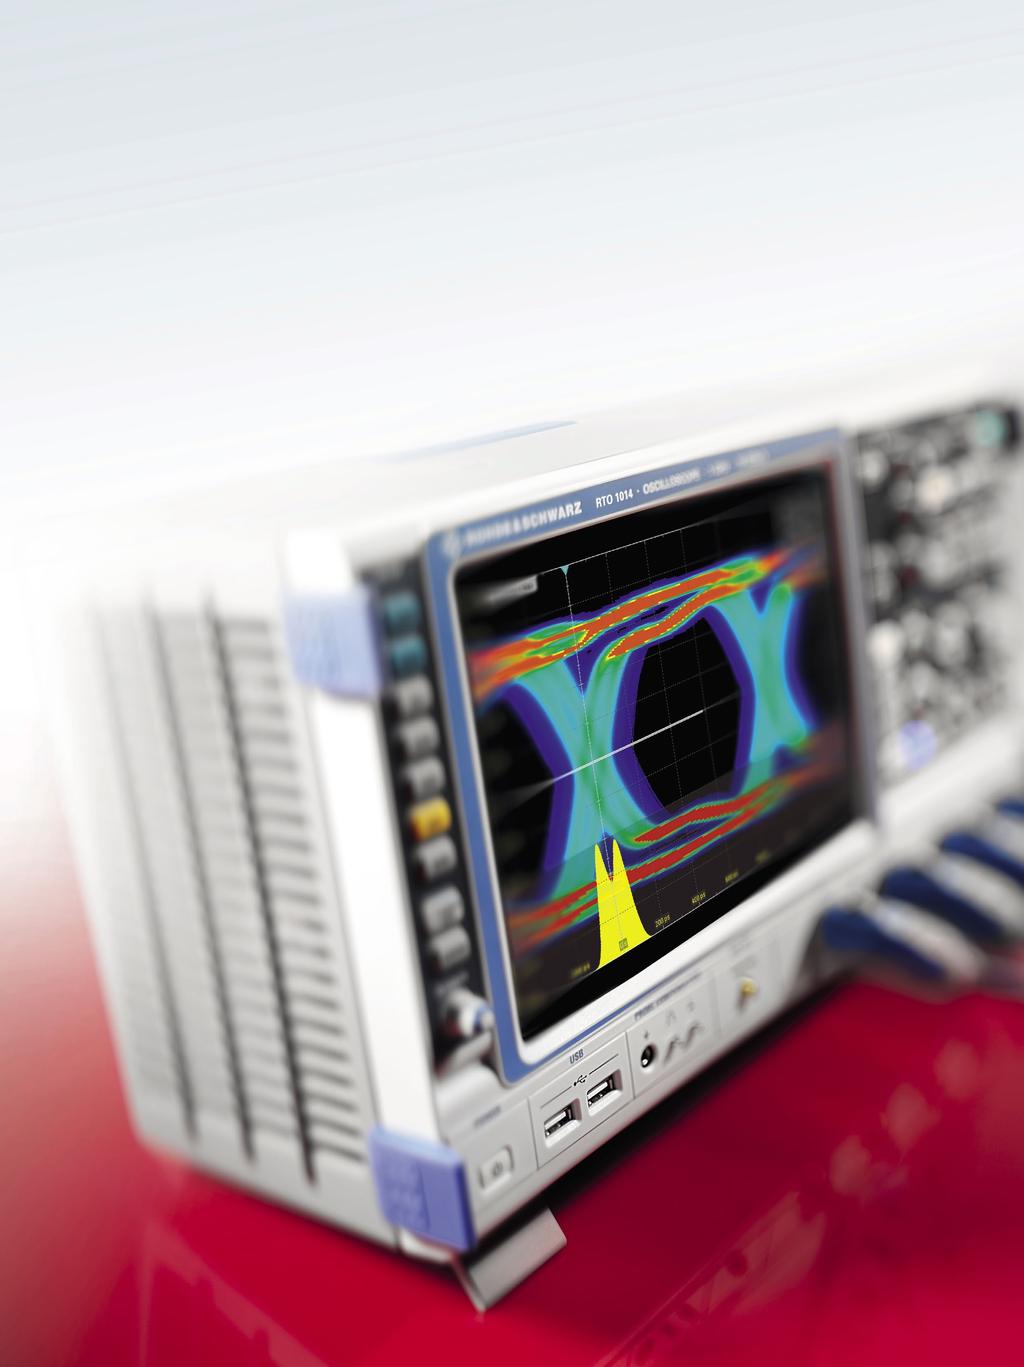 Jitter analysis with the R&S RTO oscilloscope Jitter can significantly impair digital systems and must therefore be analyzed and